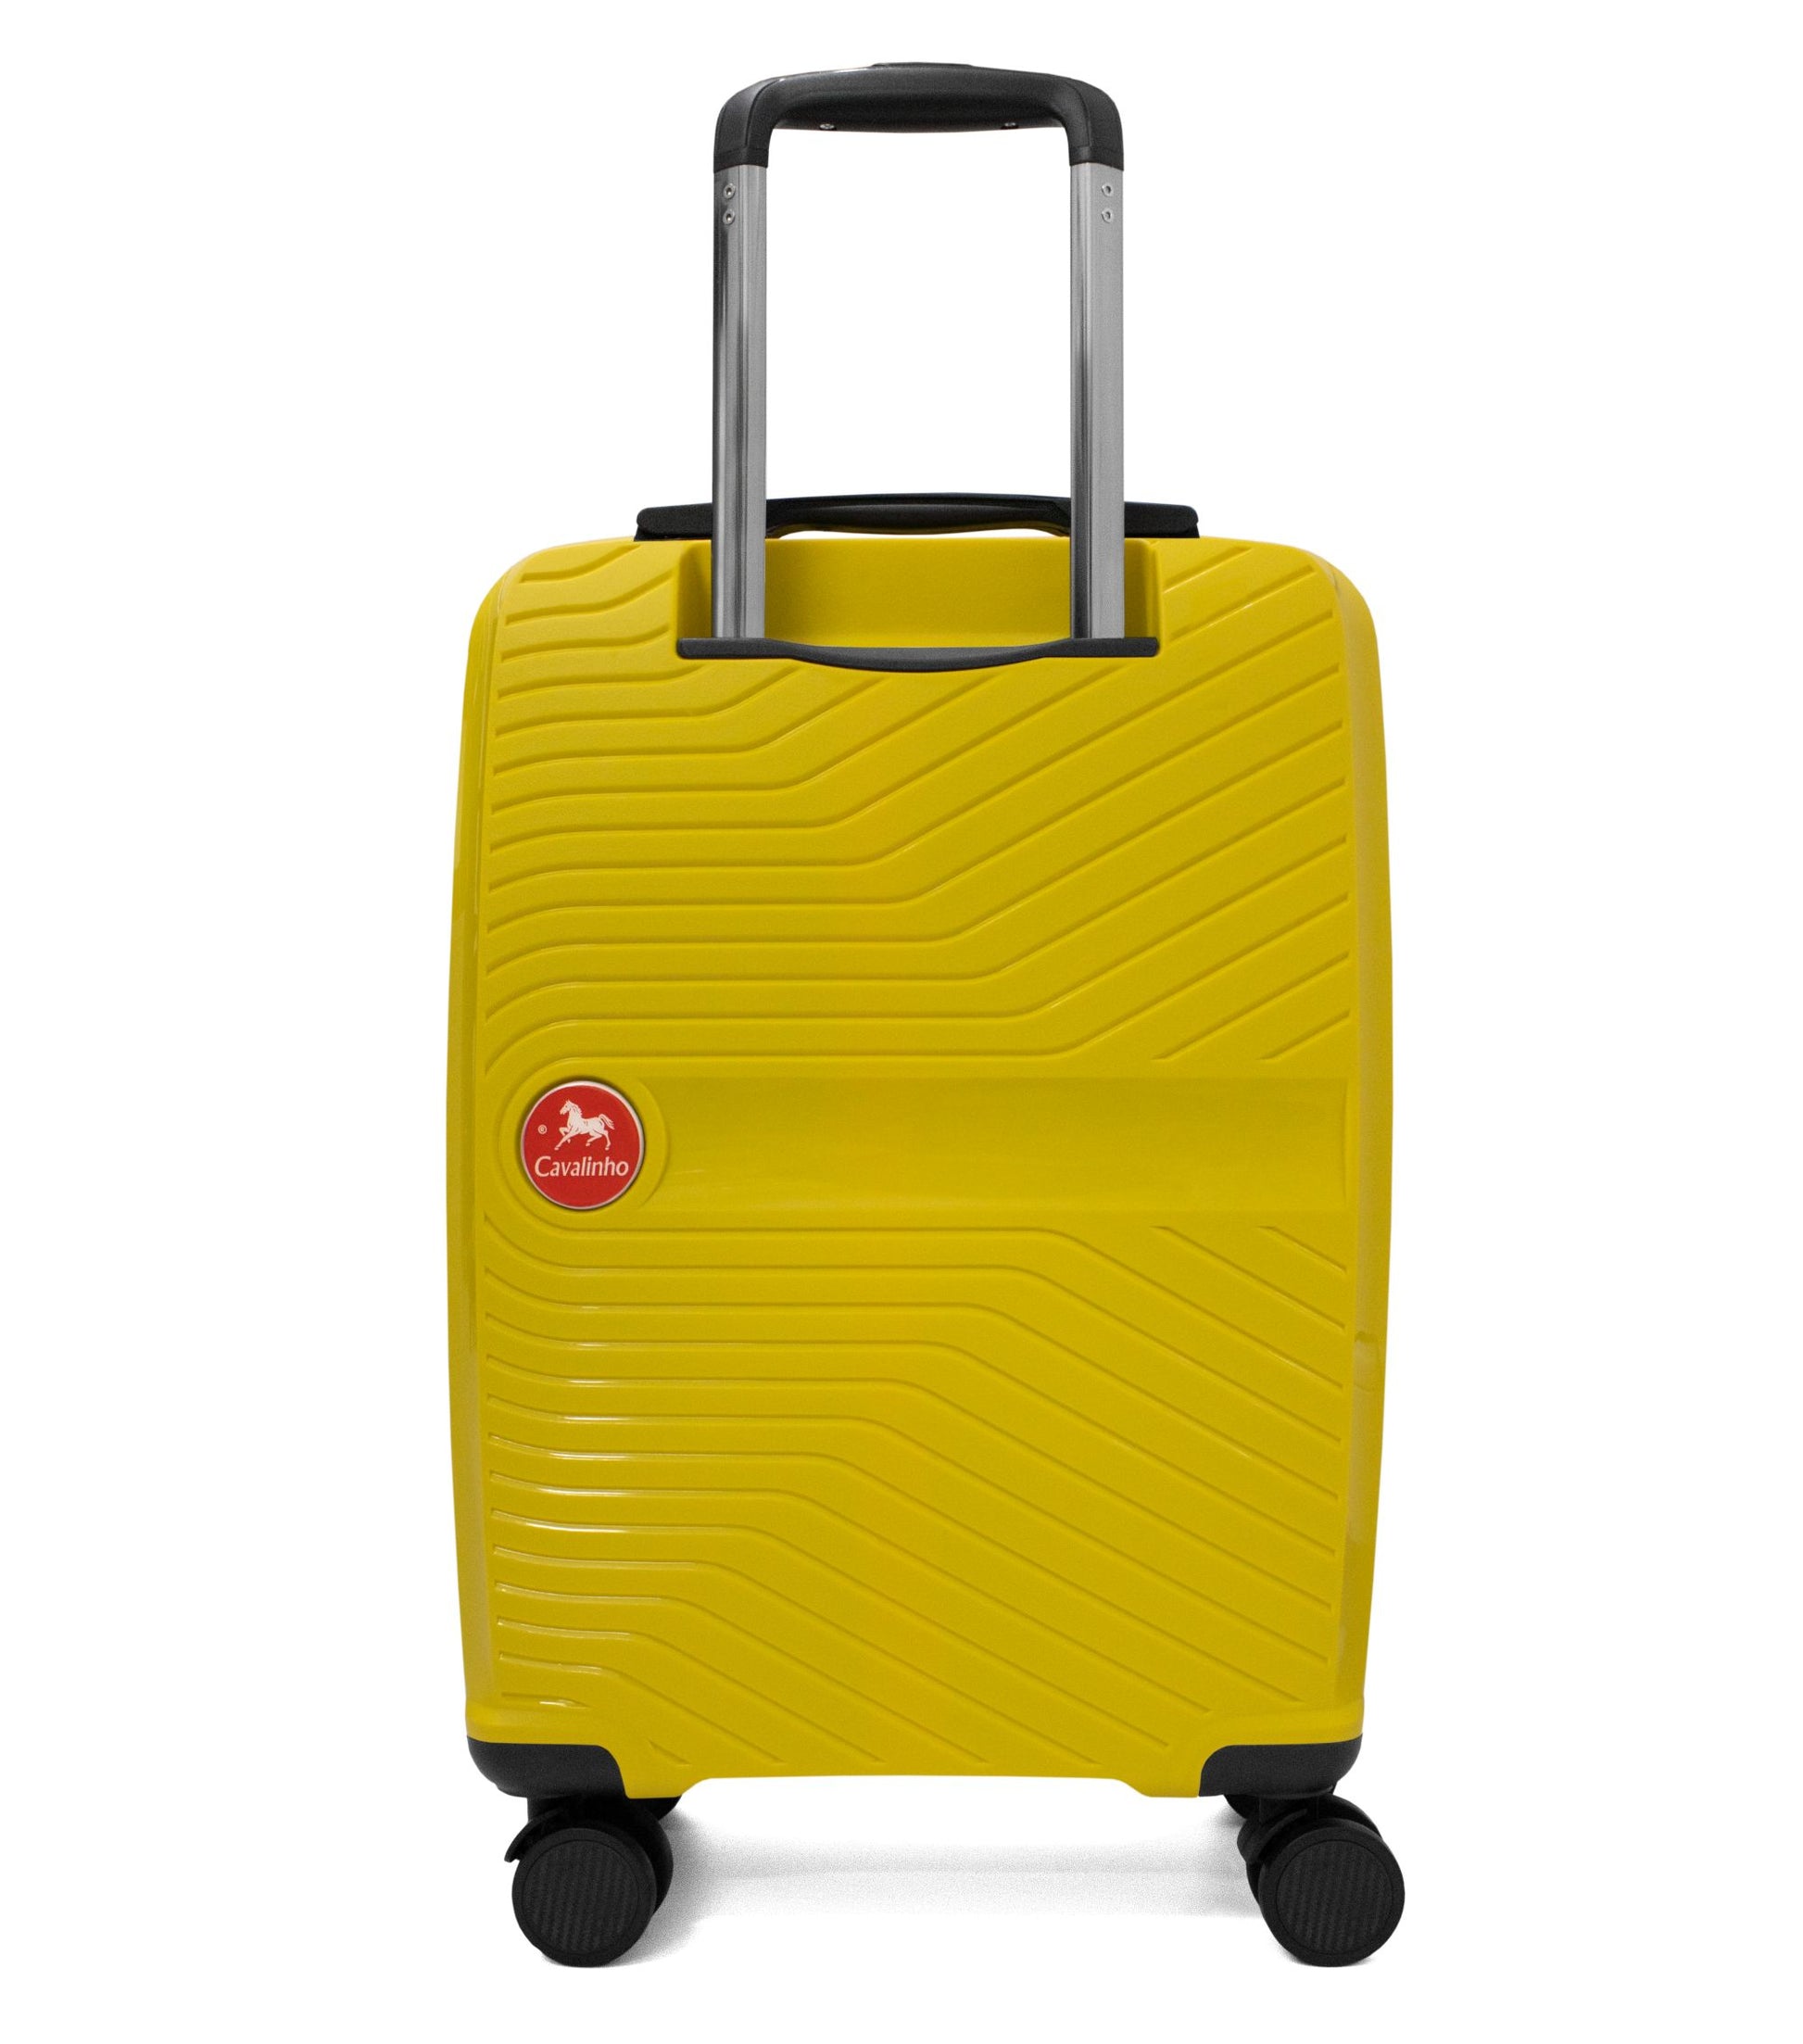 #color_ 19 inch Yellow | Cavalinho Colorful Carry-on Hardside Luggage (19") - 19 inch Yellow - 68020004.08.19_3